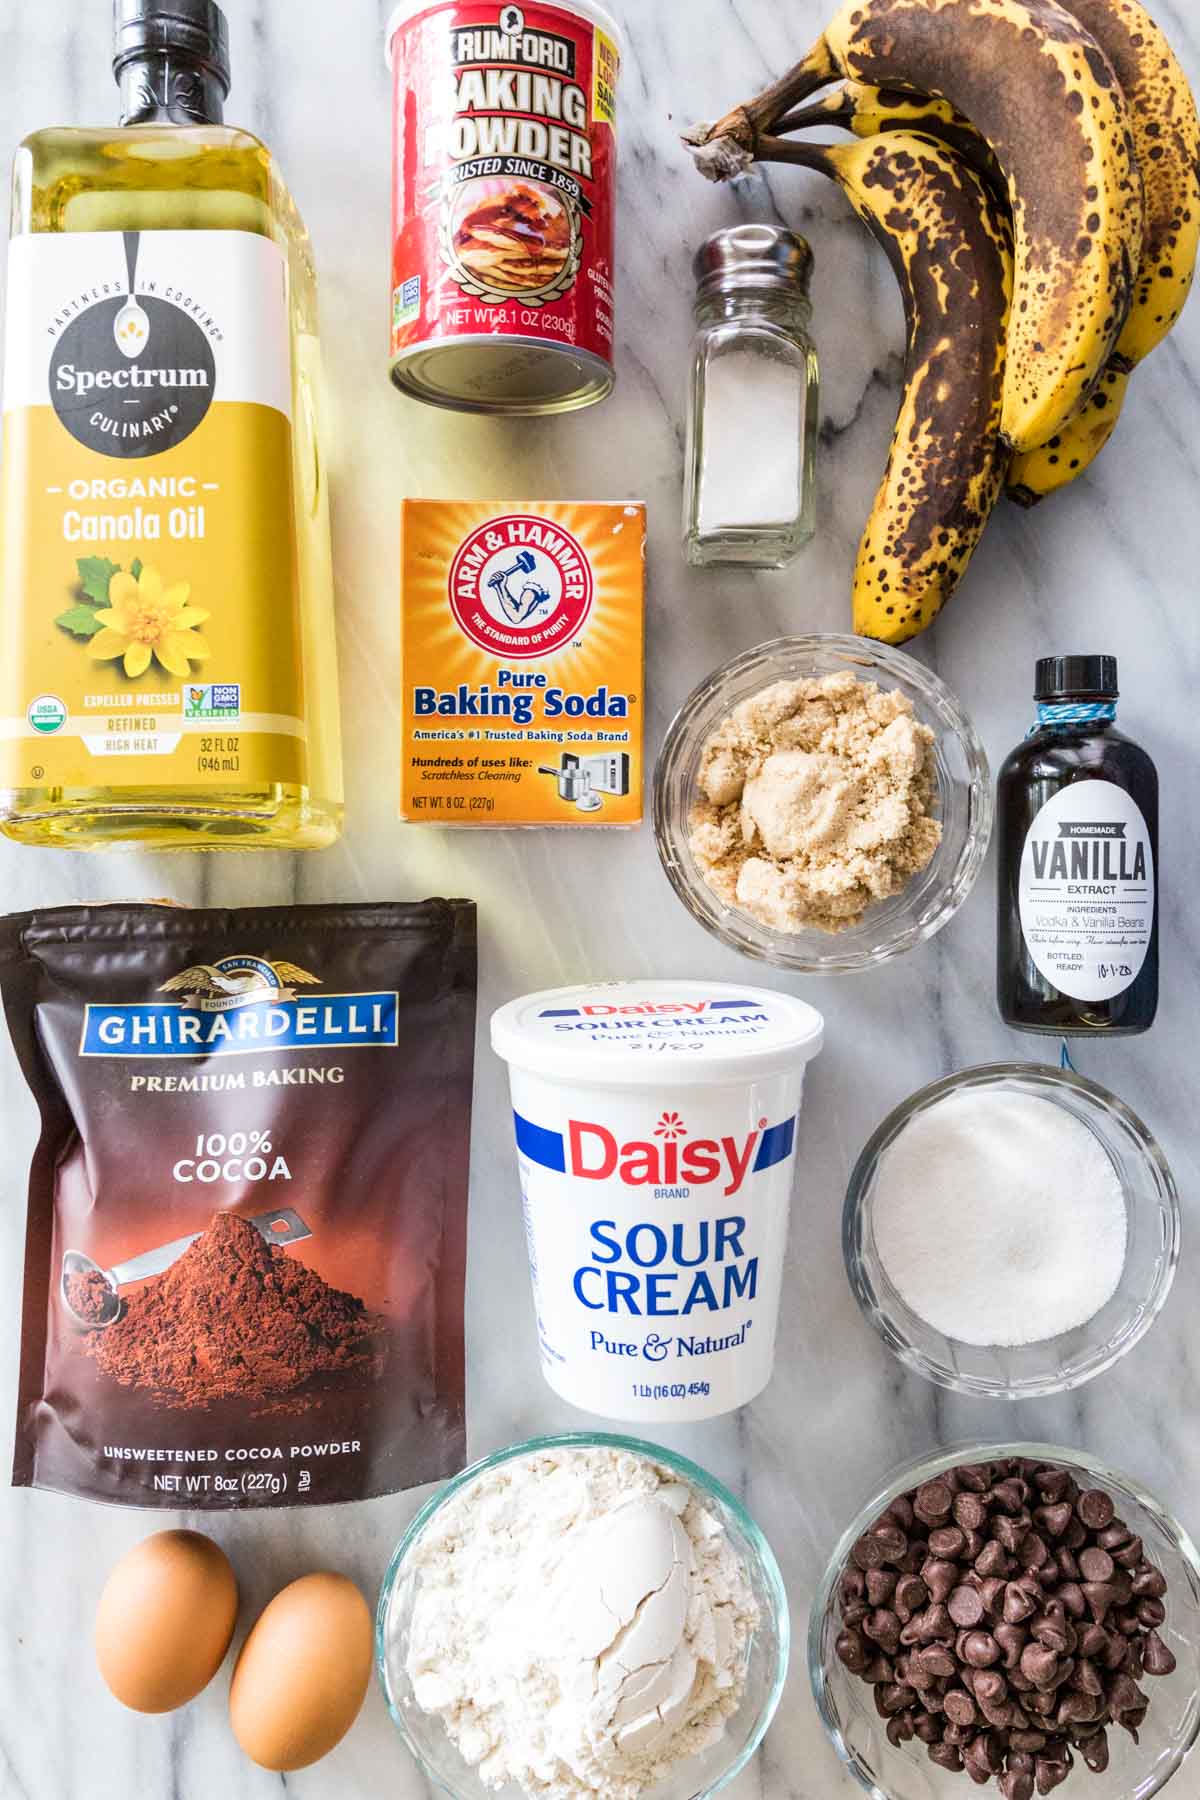 overhead view of ingredients including ripe bananas, oil, sour cream, cocoa powder, and more